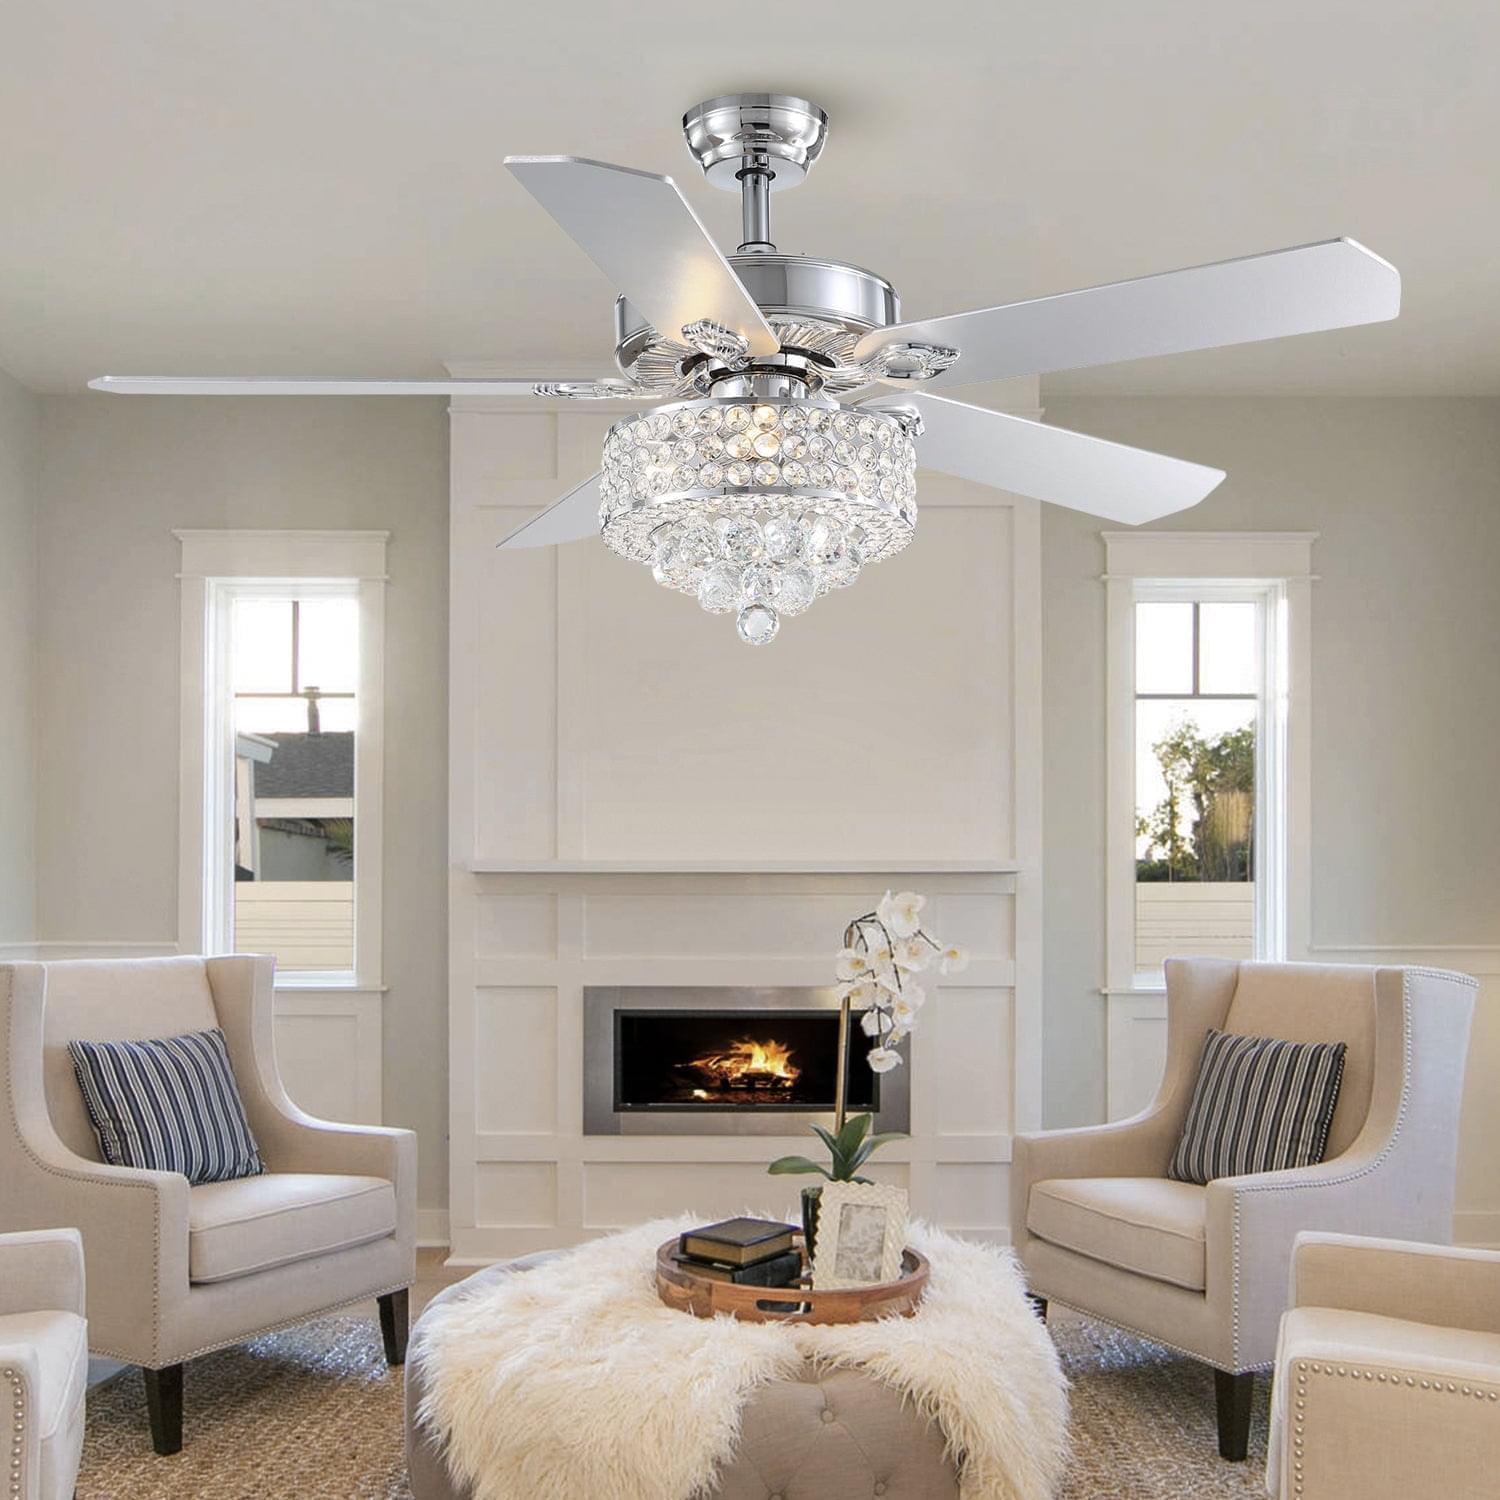 5 - Blade Luxury Crystal Ceiling Fan with Remote Control